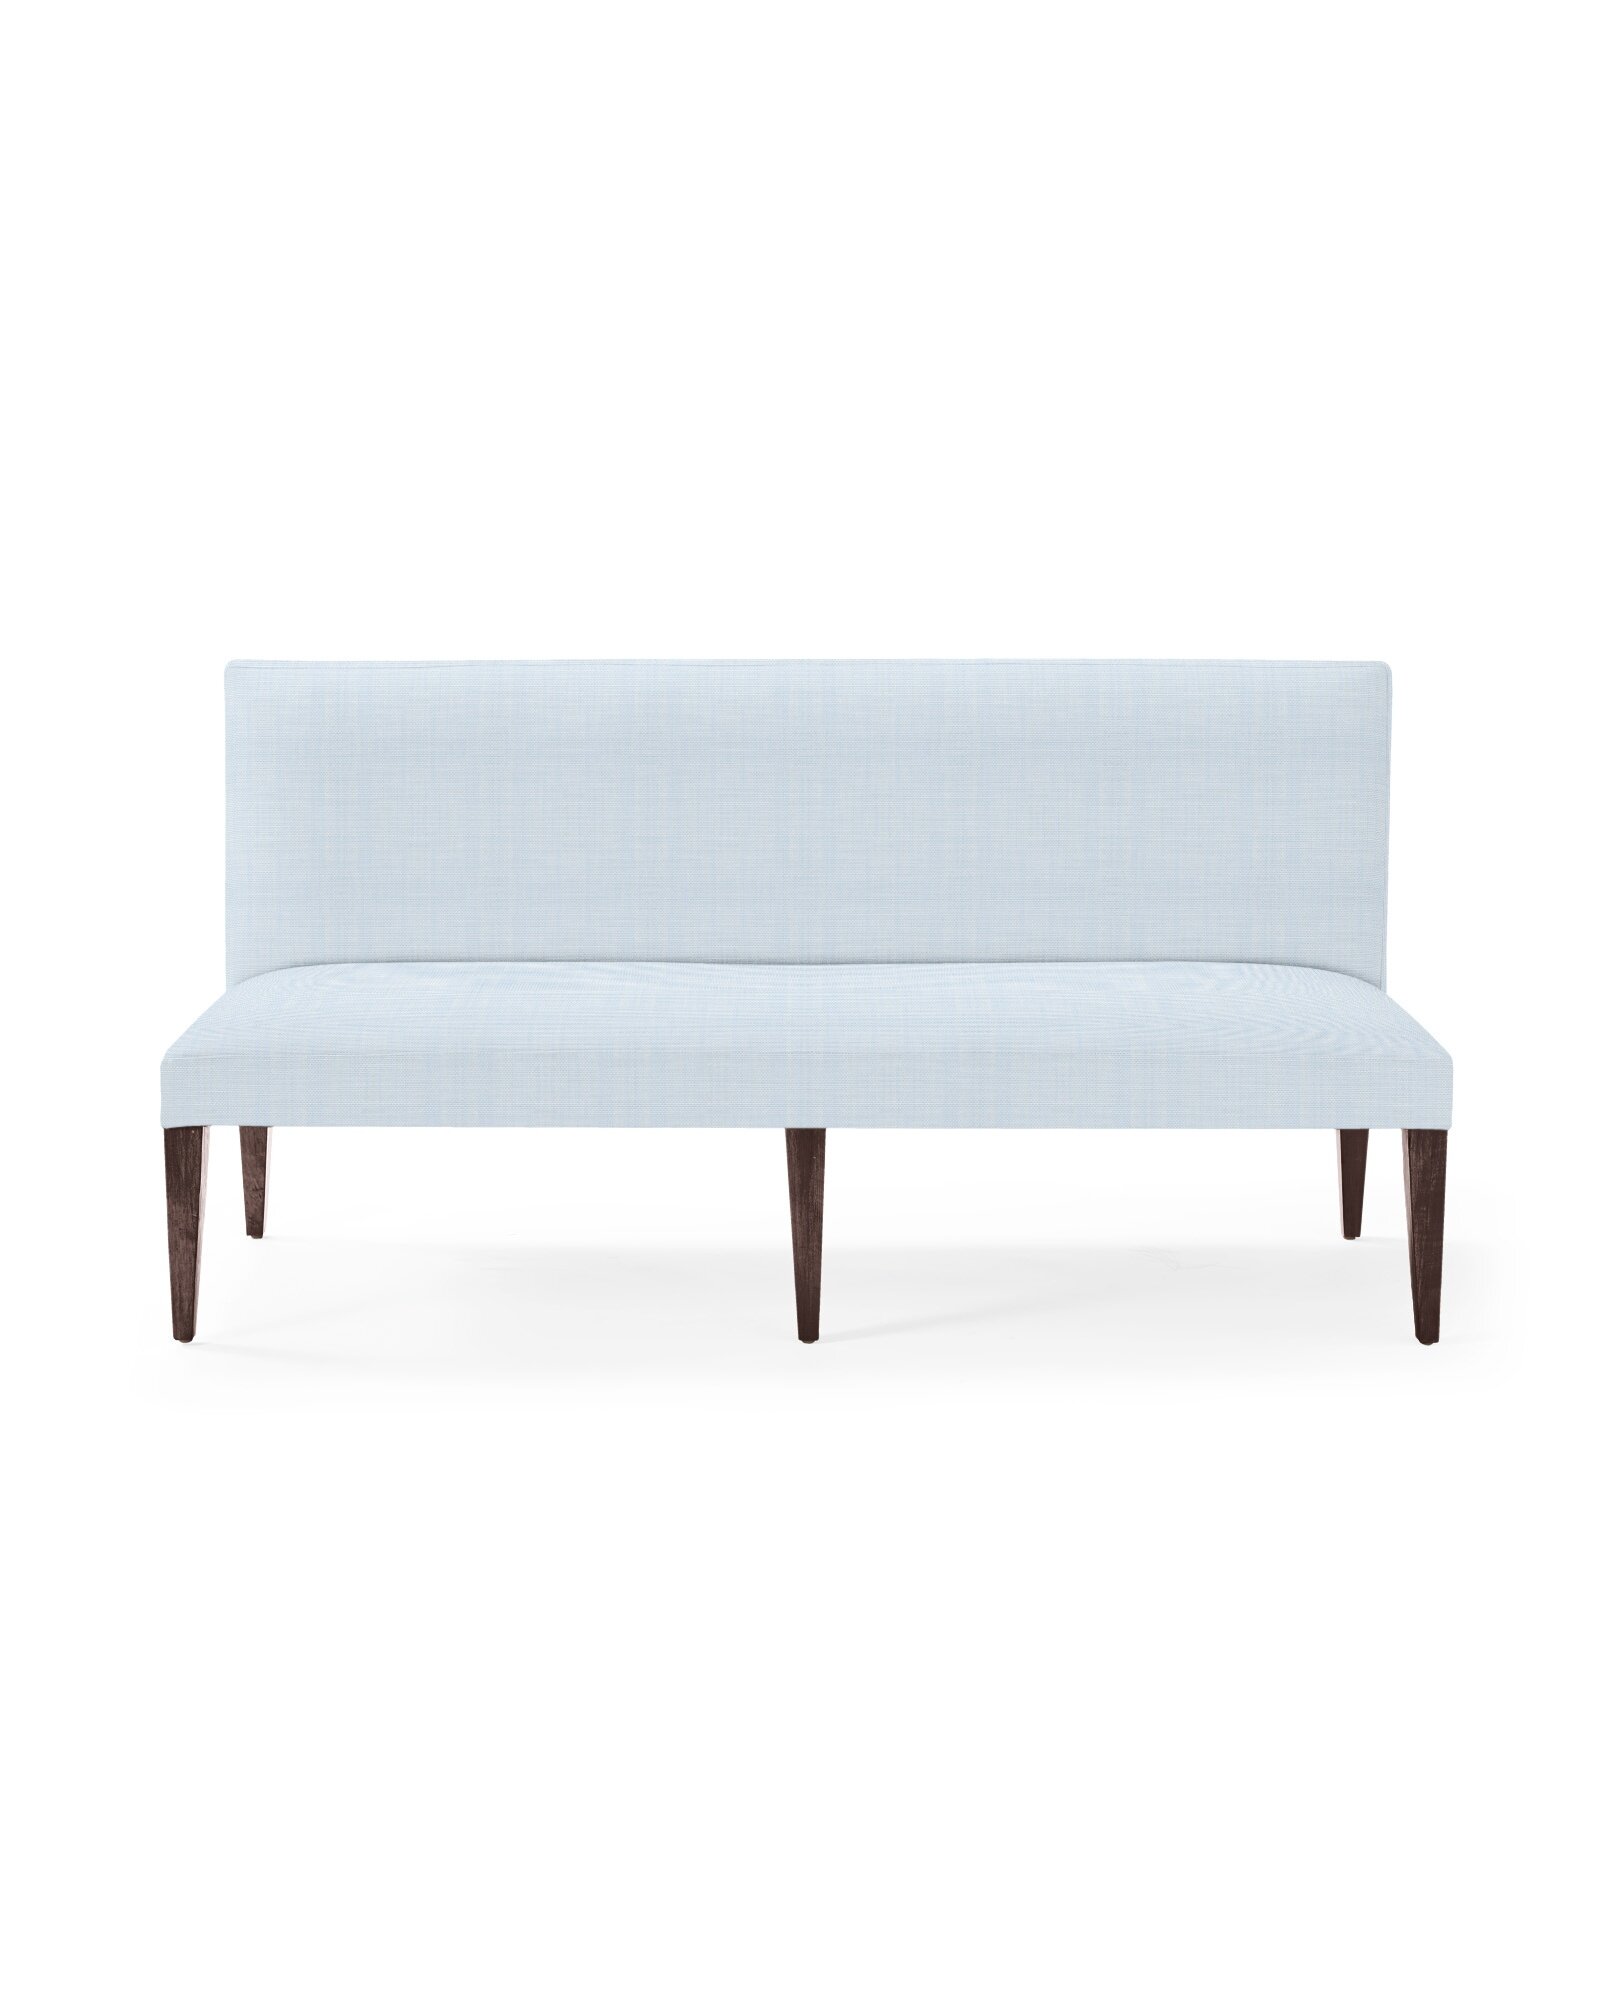 Serena &amp; Lily - Ross Dining Bench - $2,298